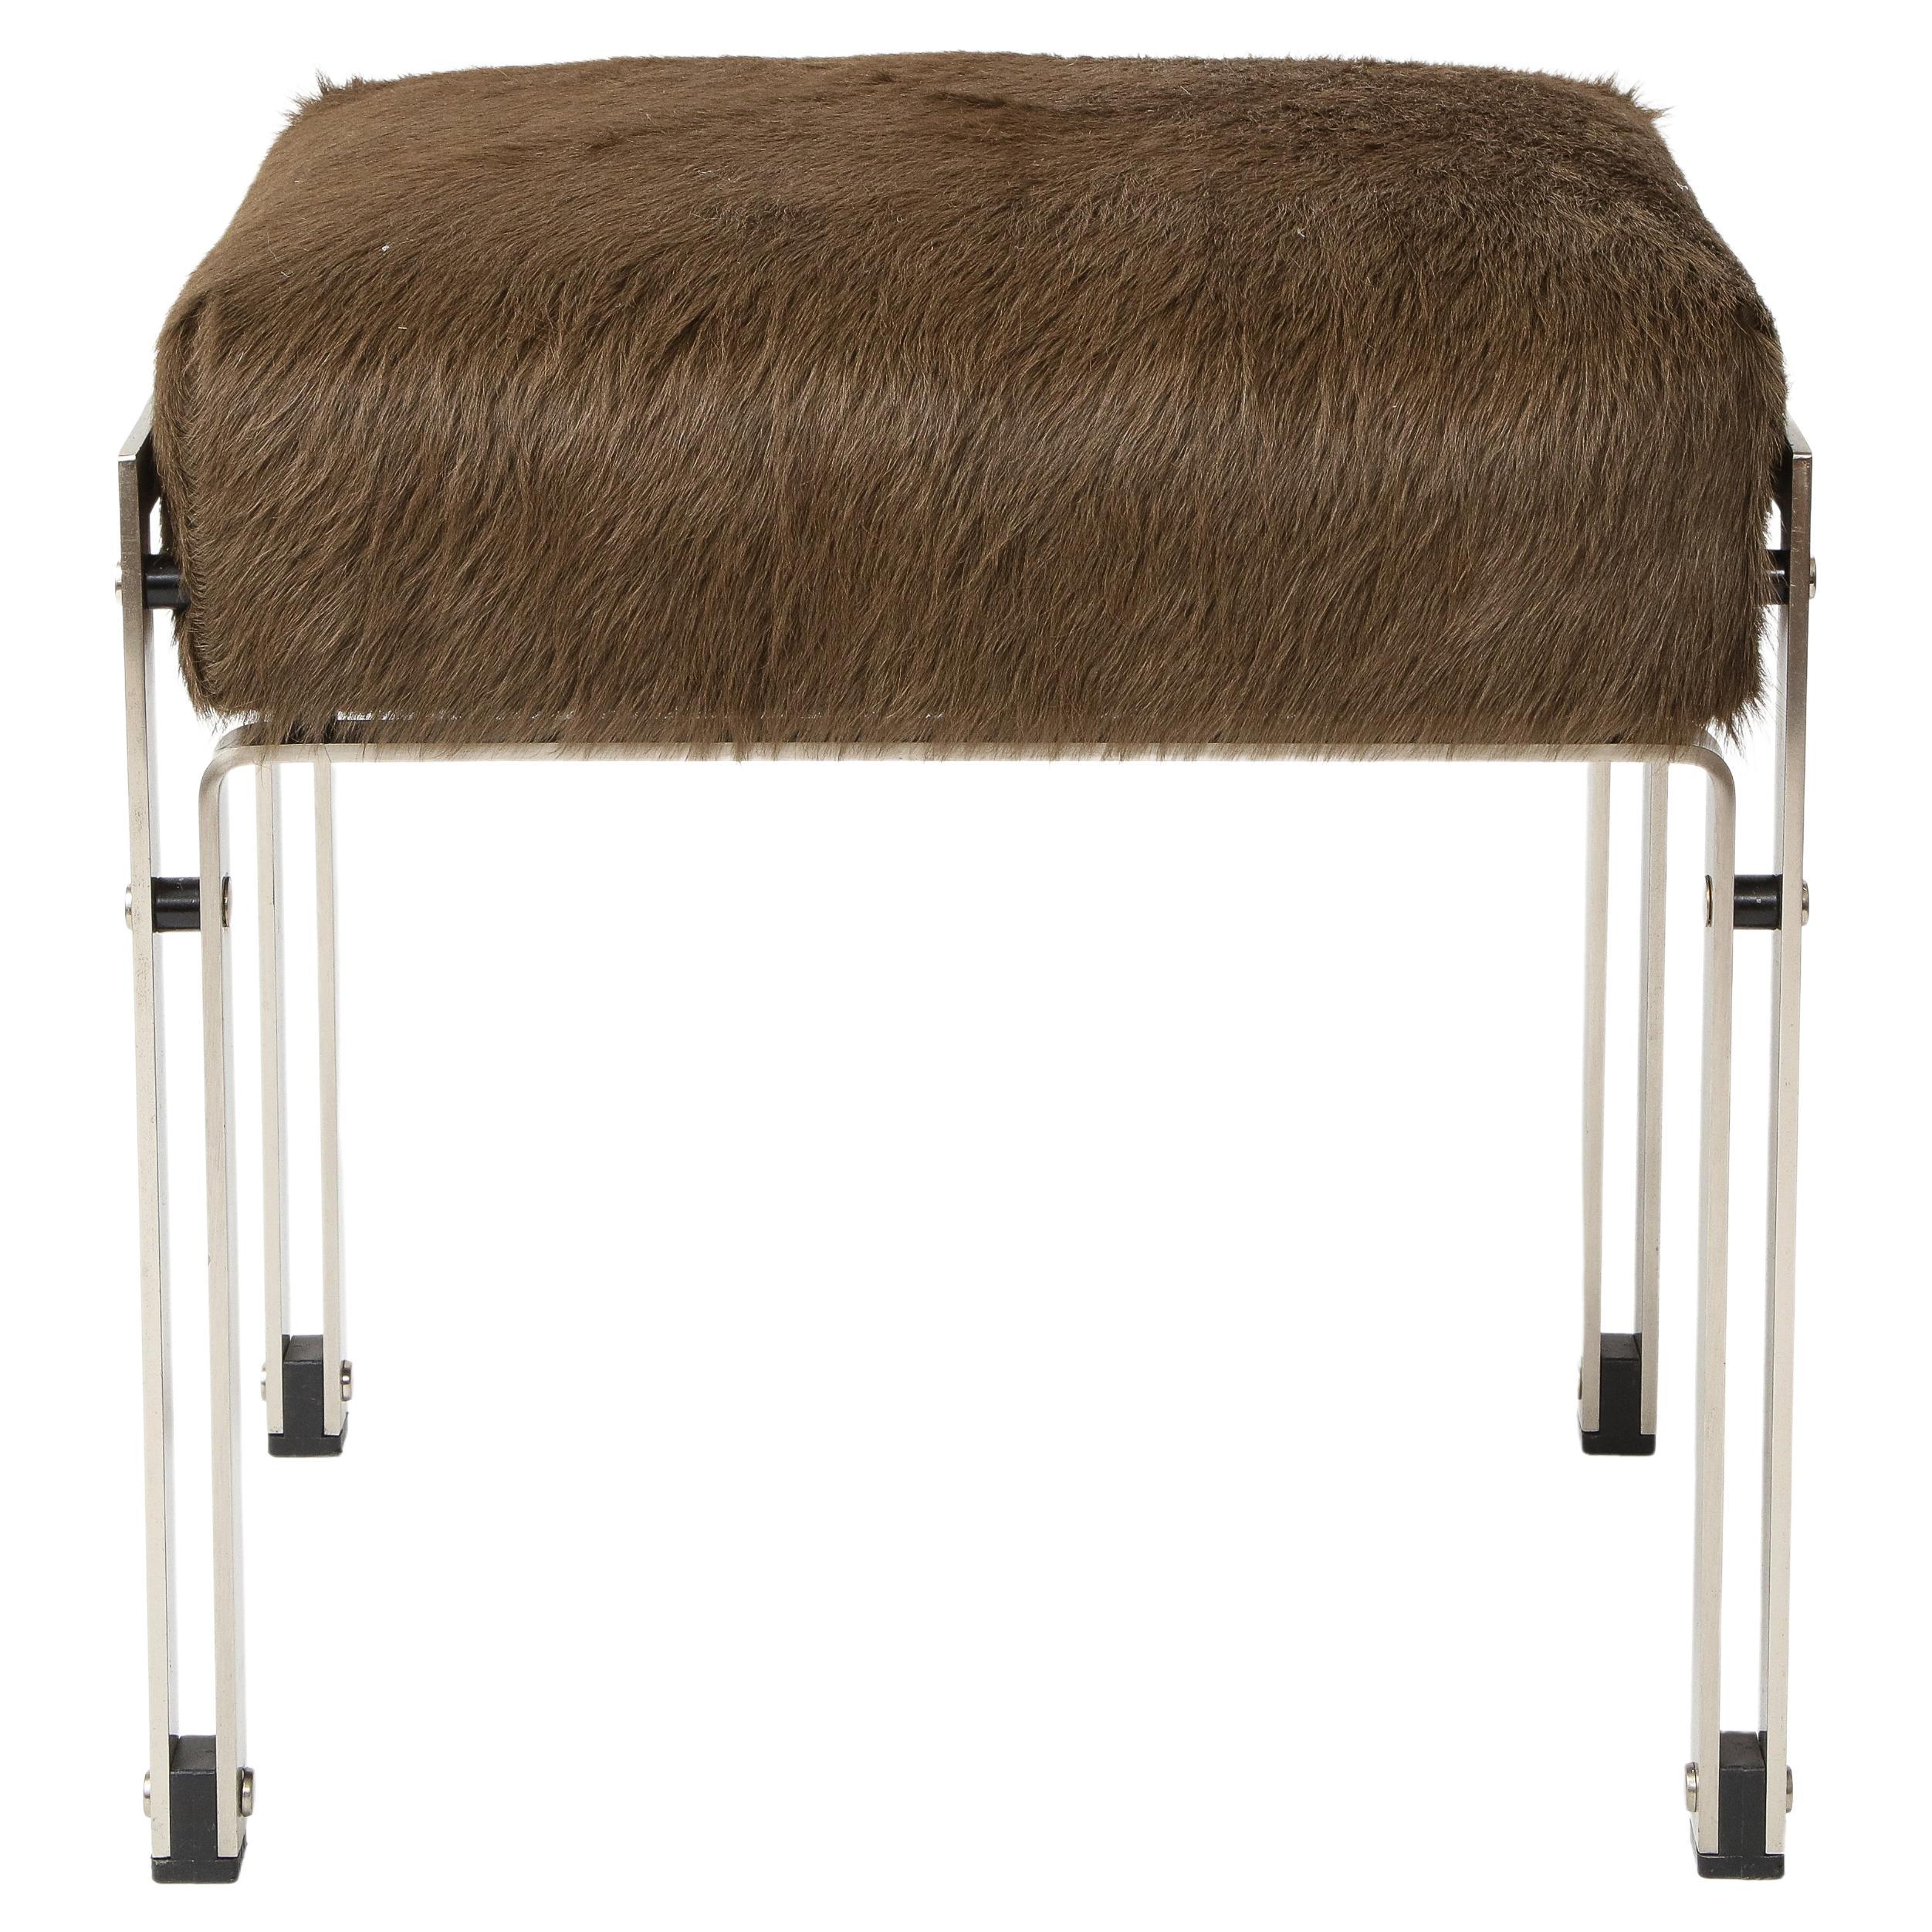 Mid-Century Brown Hair on Hide Upholstered Chrome Stool, 20th Century